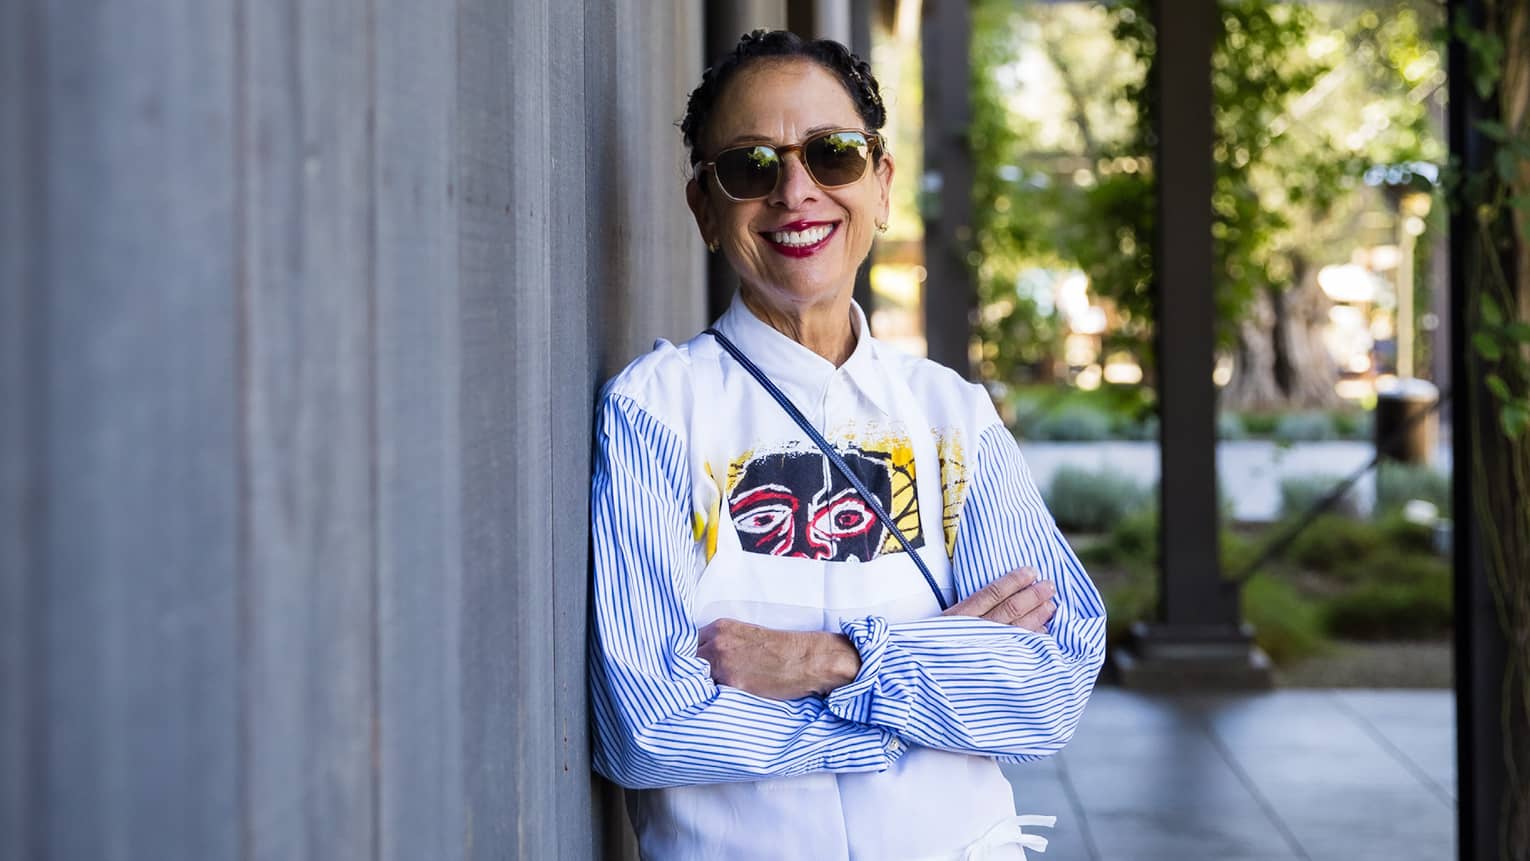 Nancy Silverton leaning against a building and wearing a chef?s coat.